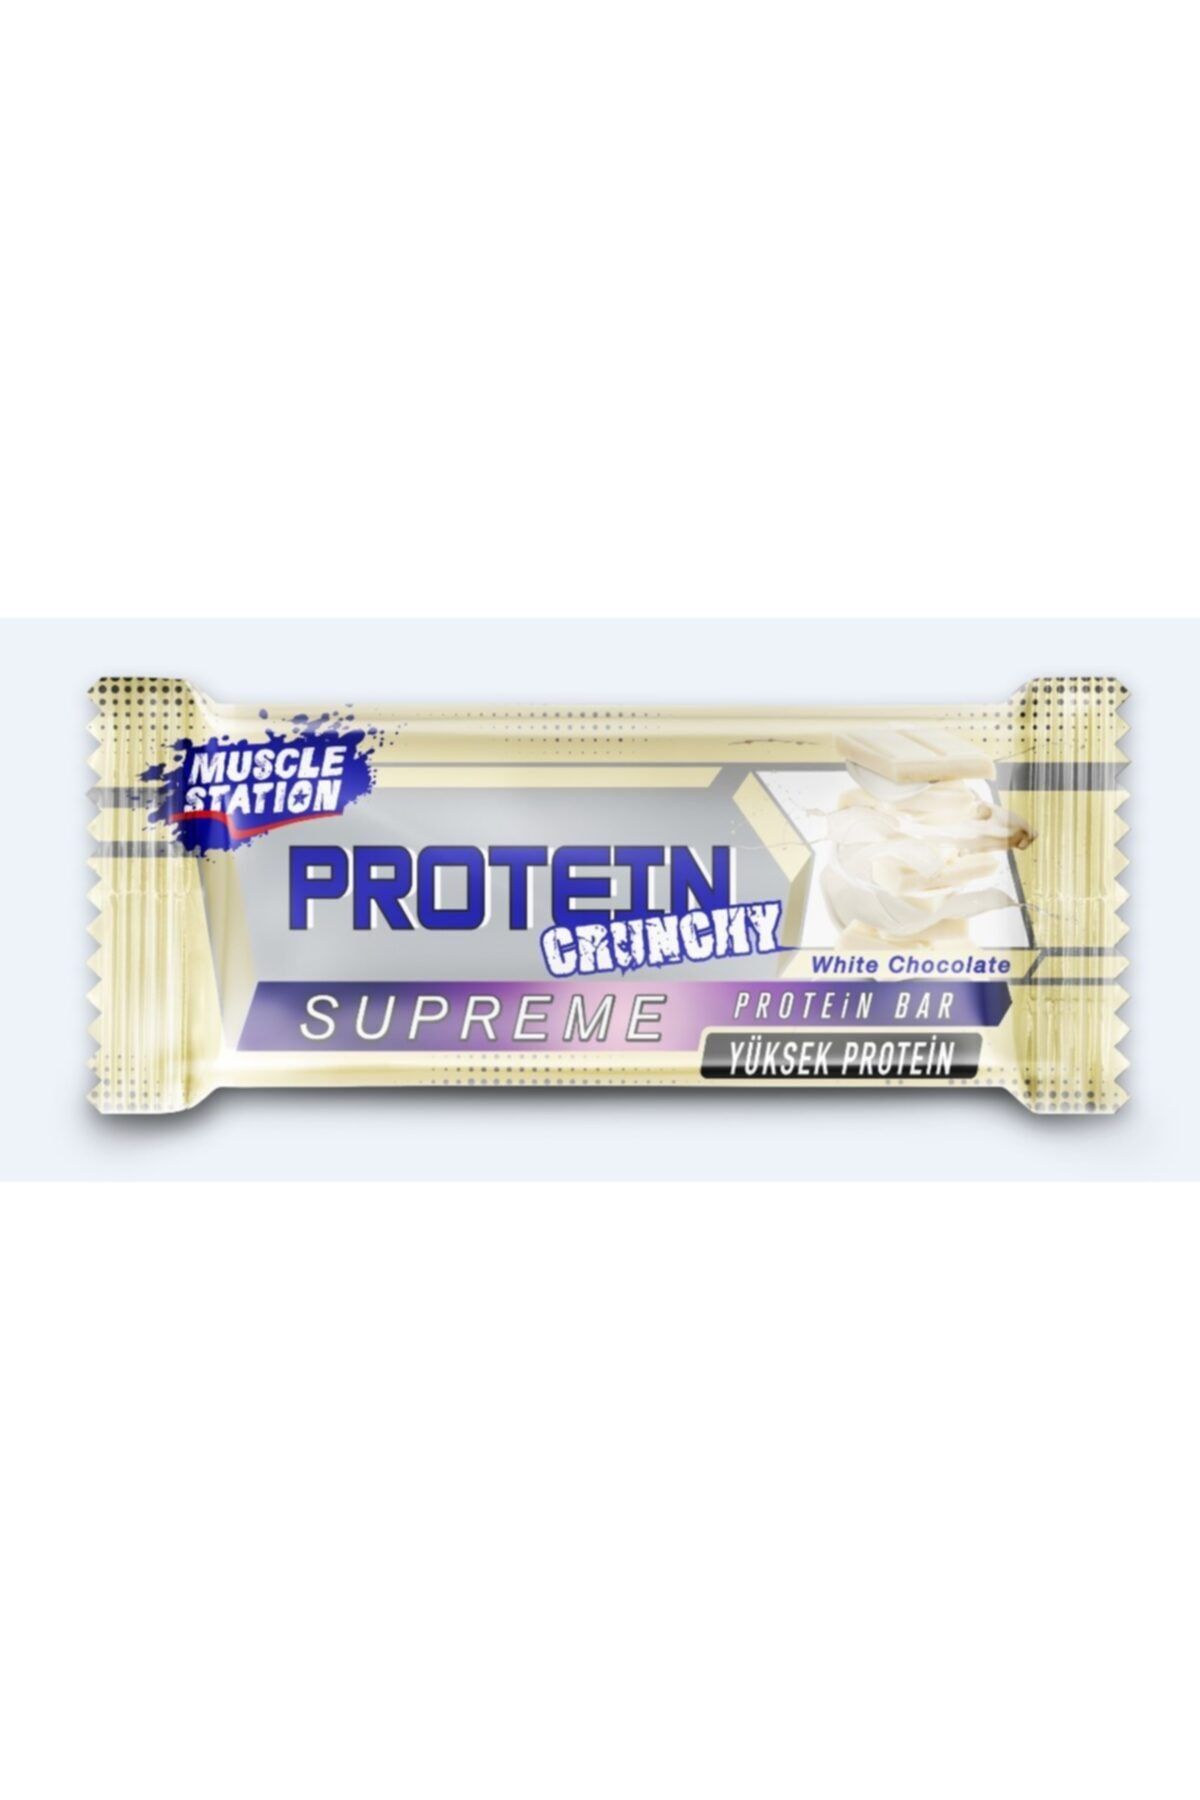 Muscle Station Musclestation Supreme White Chocolate